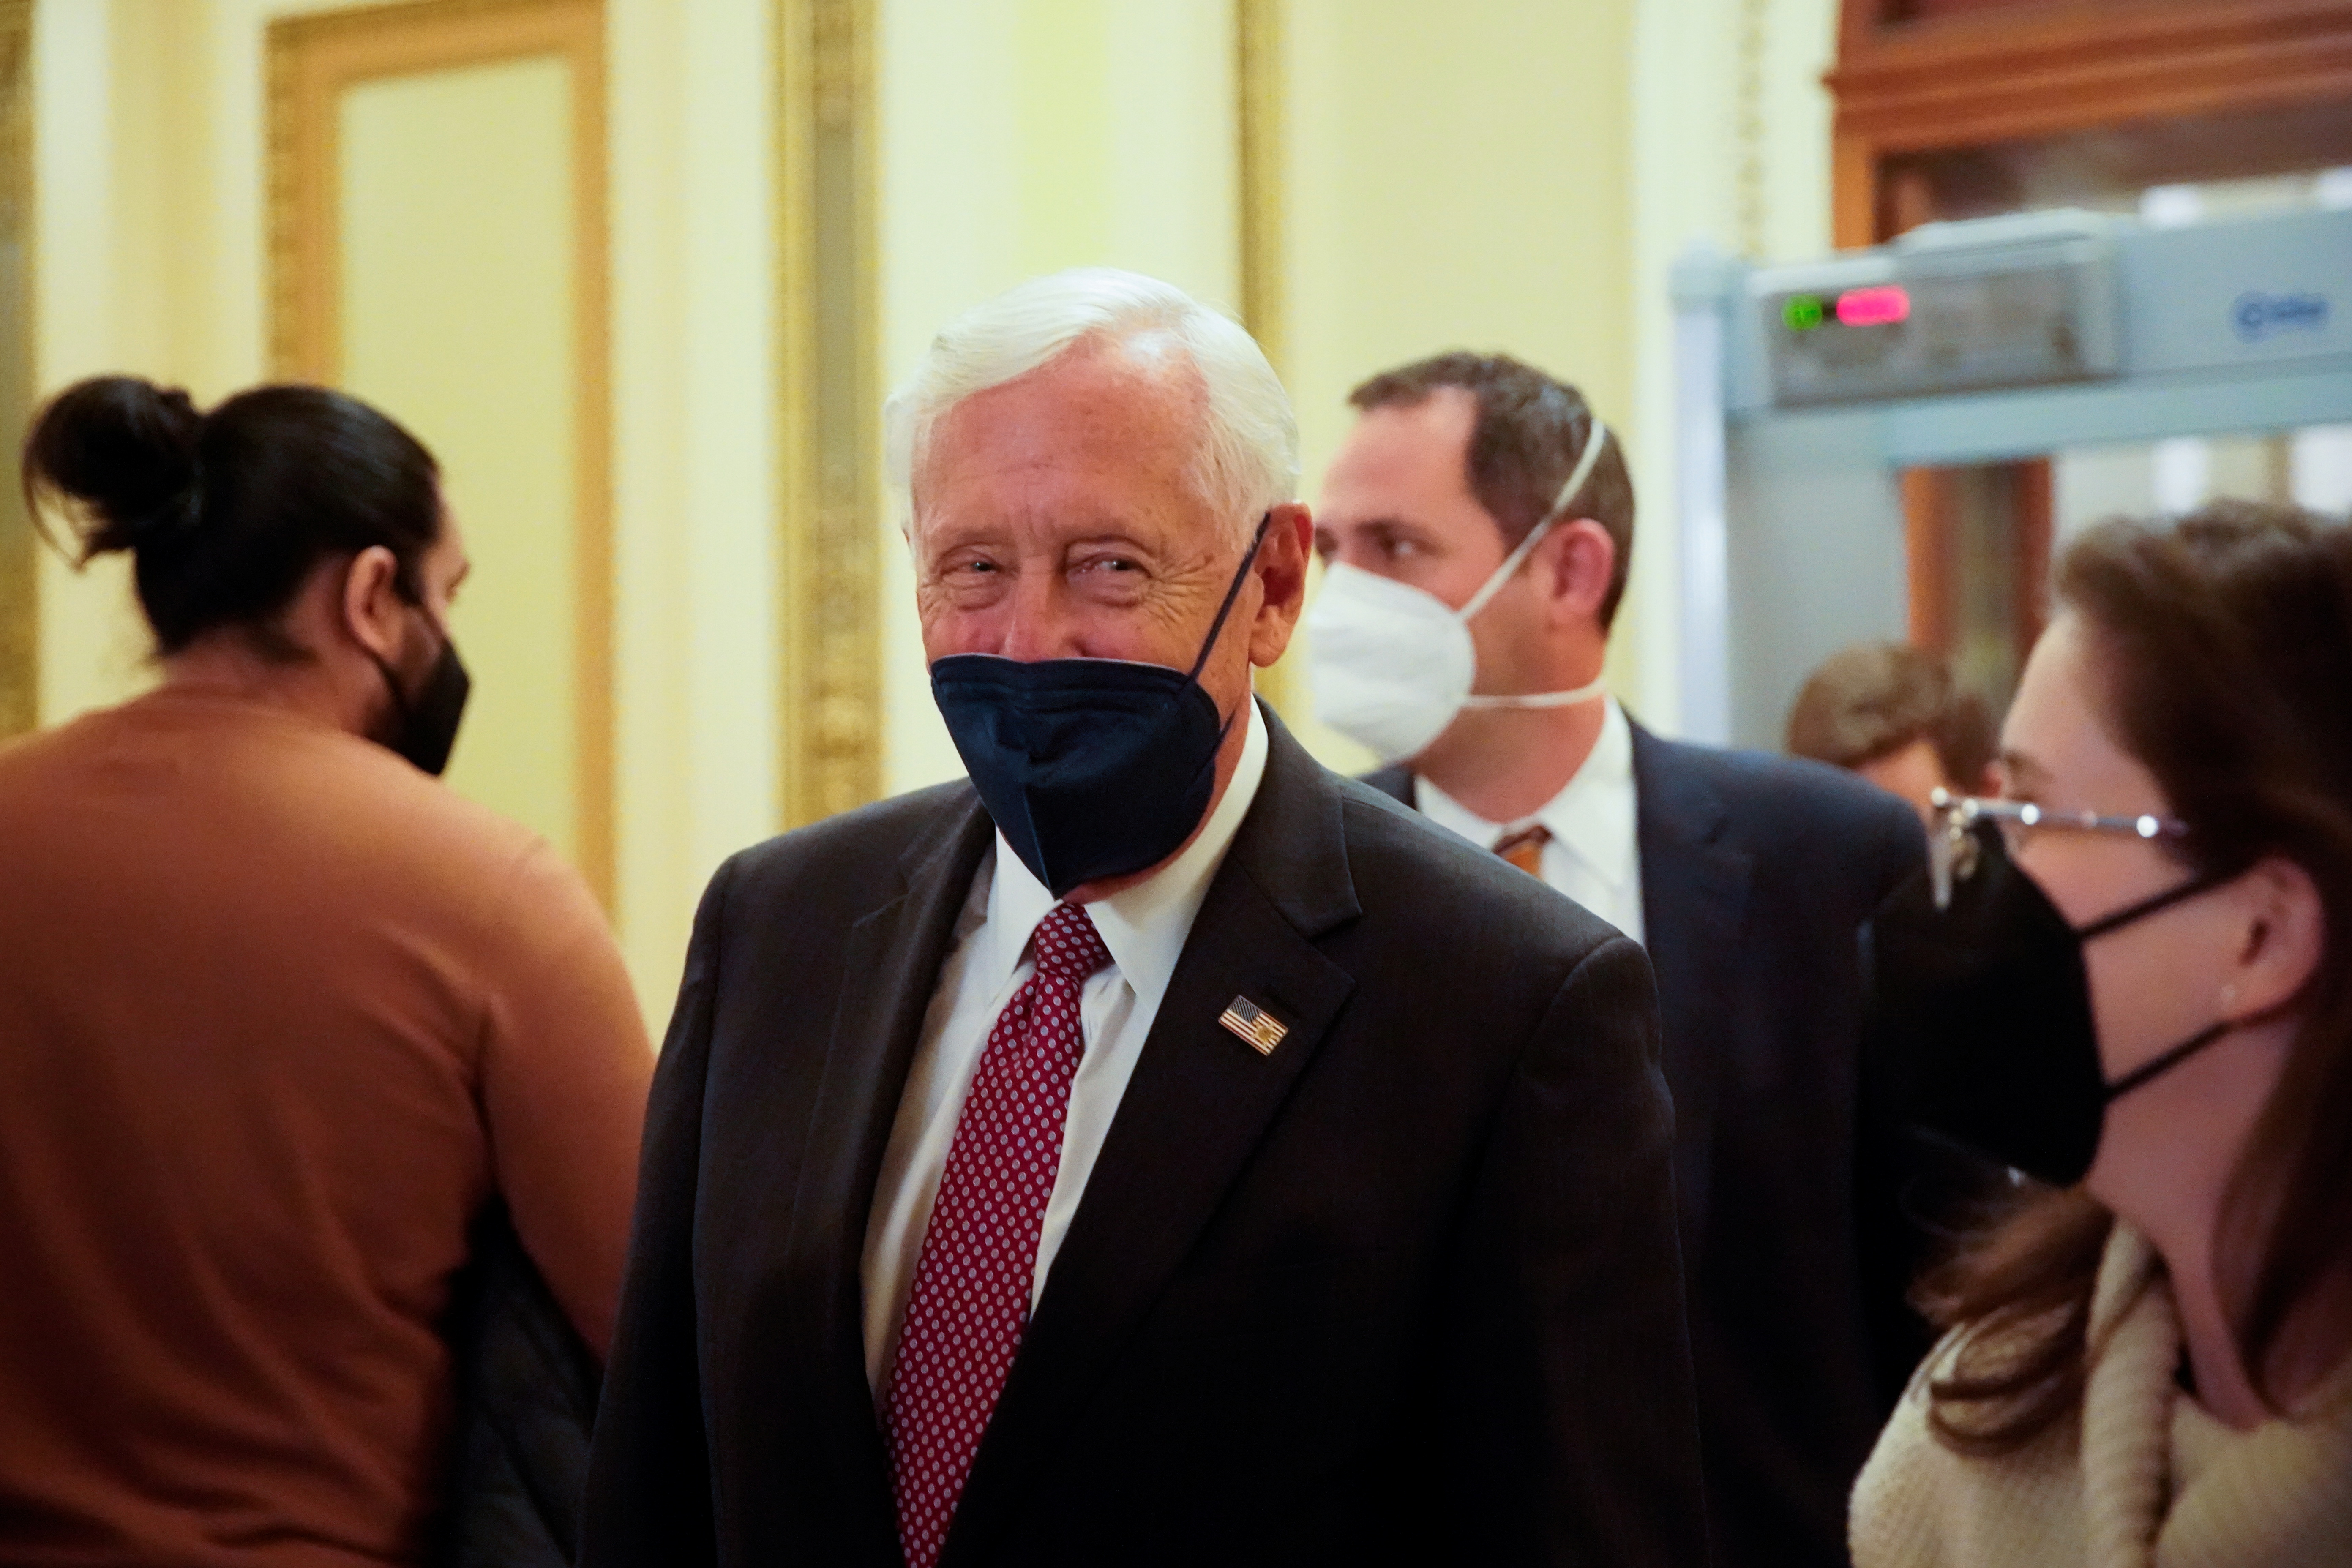 U.S. Representative Steny Hoyer (D-MD) smiles as he talks to a reporter after the House passed the bipartisan infrastructure package at the U.S. Capitol in Washington, U.S., November 6, 2021. REUTERS/Elizabeth Frantz